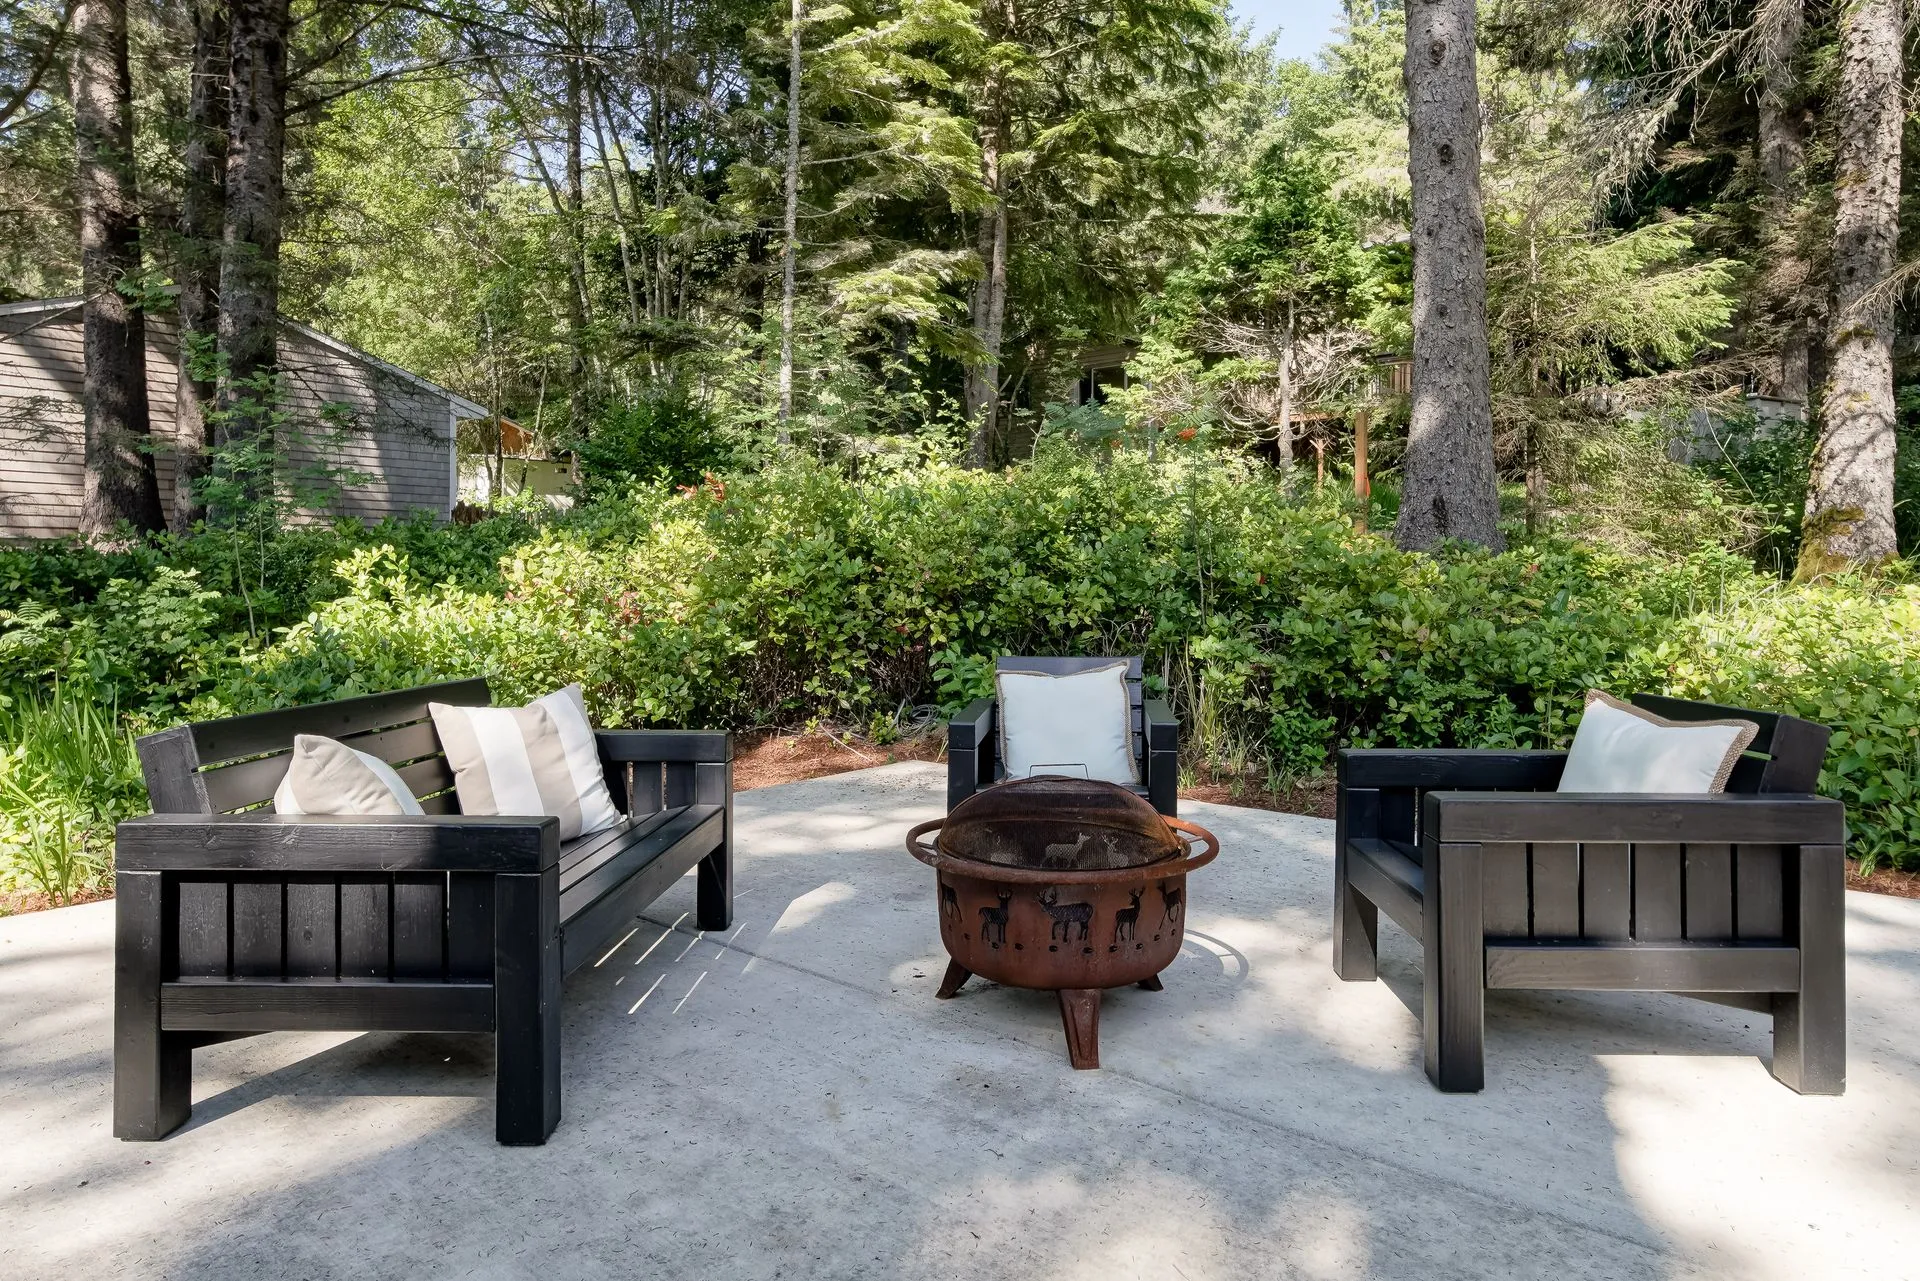 Vacation Rental in Cannon Beach, Seven Spruce patio with fire pit